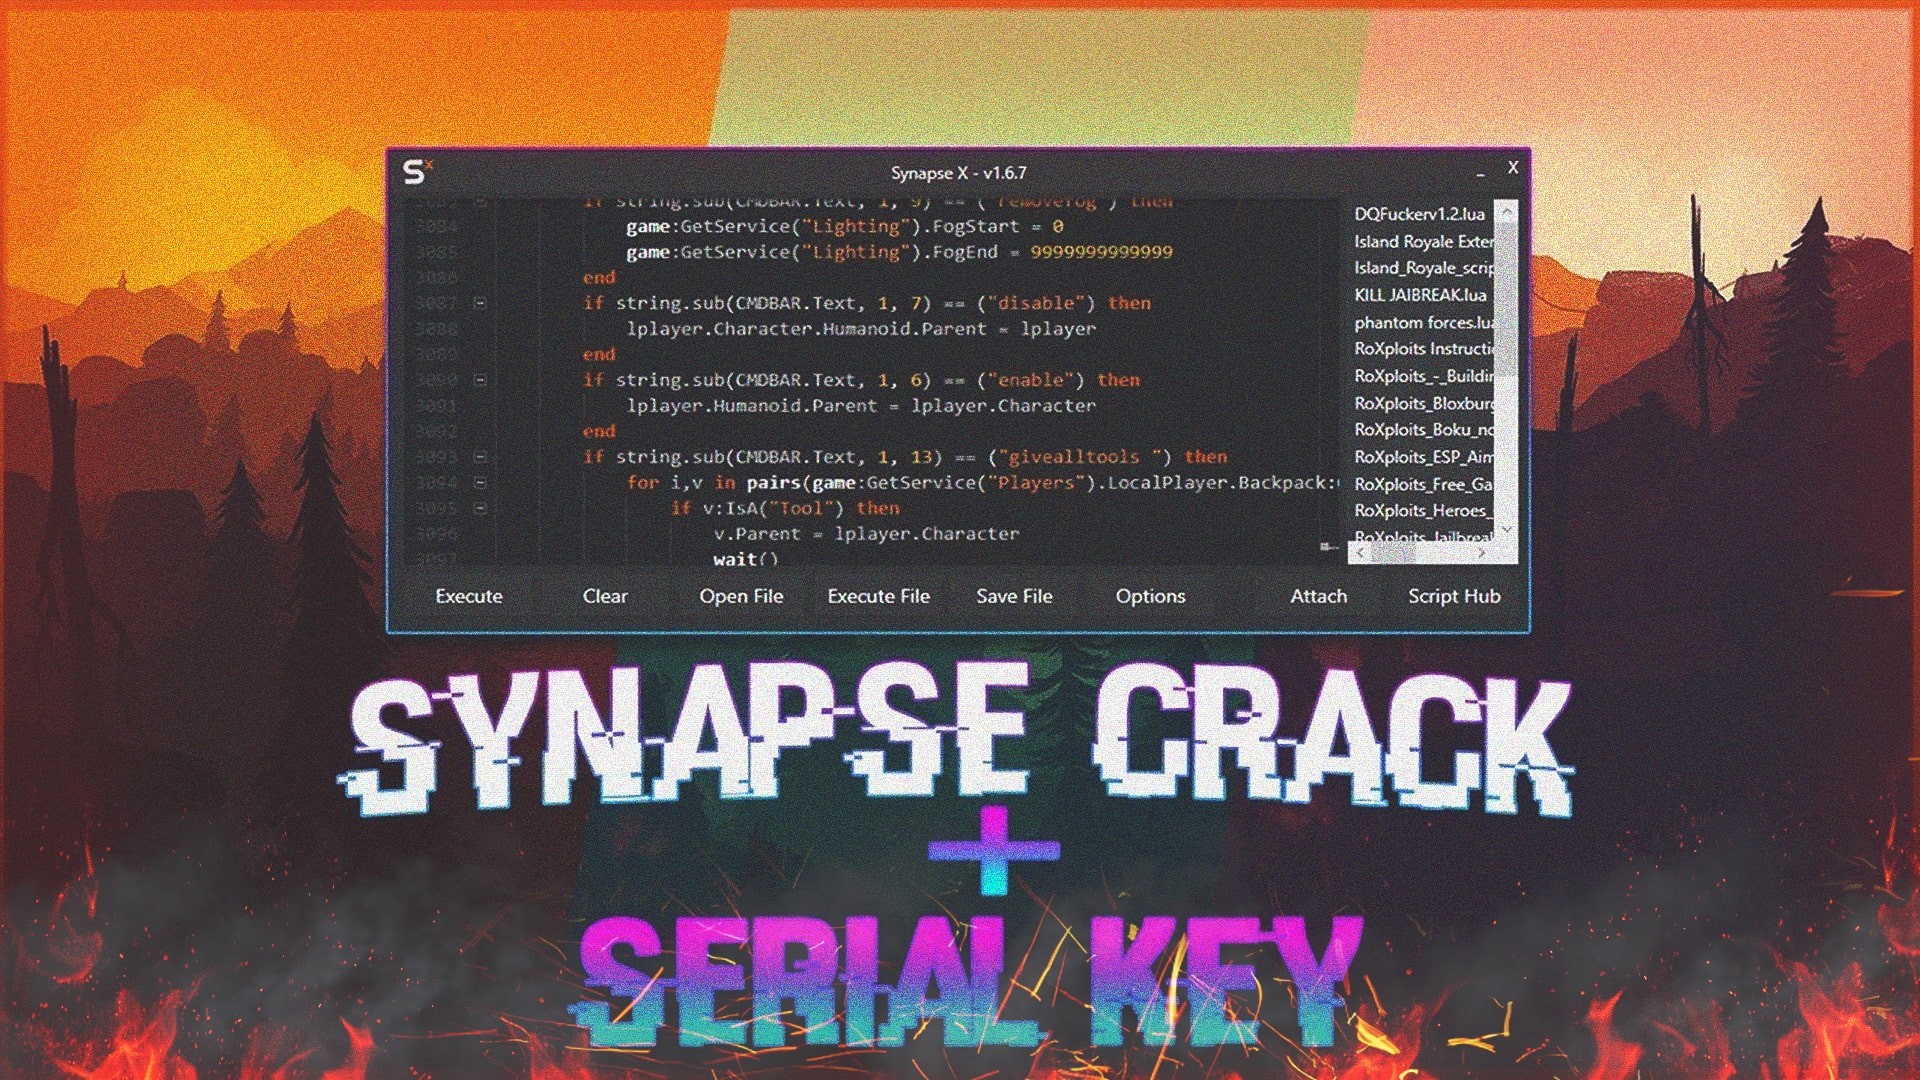 Game getservice players. Синапс РОБЛОКС. Synapse cracked. Synapse x cracked. Synapse x cracked Roblox.